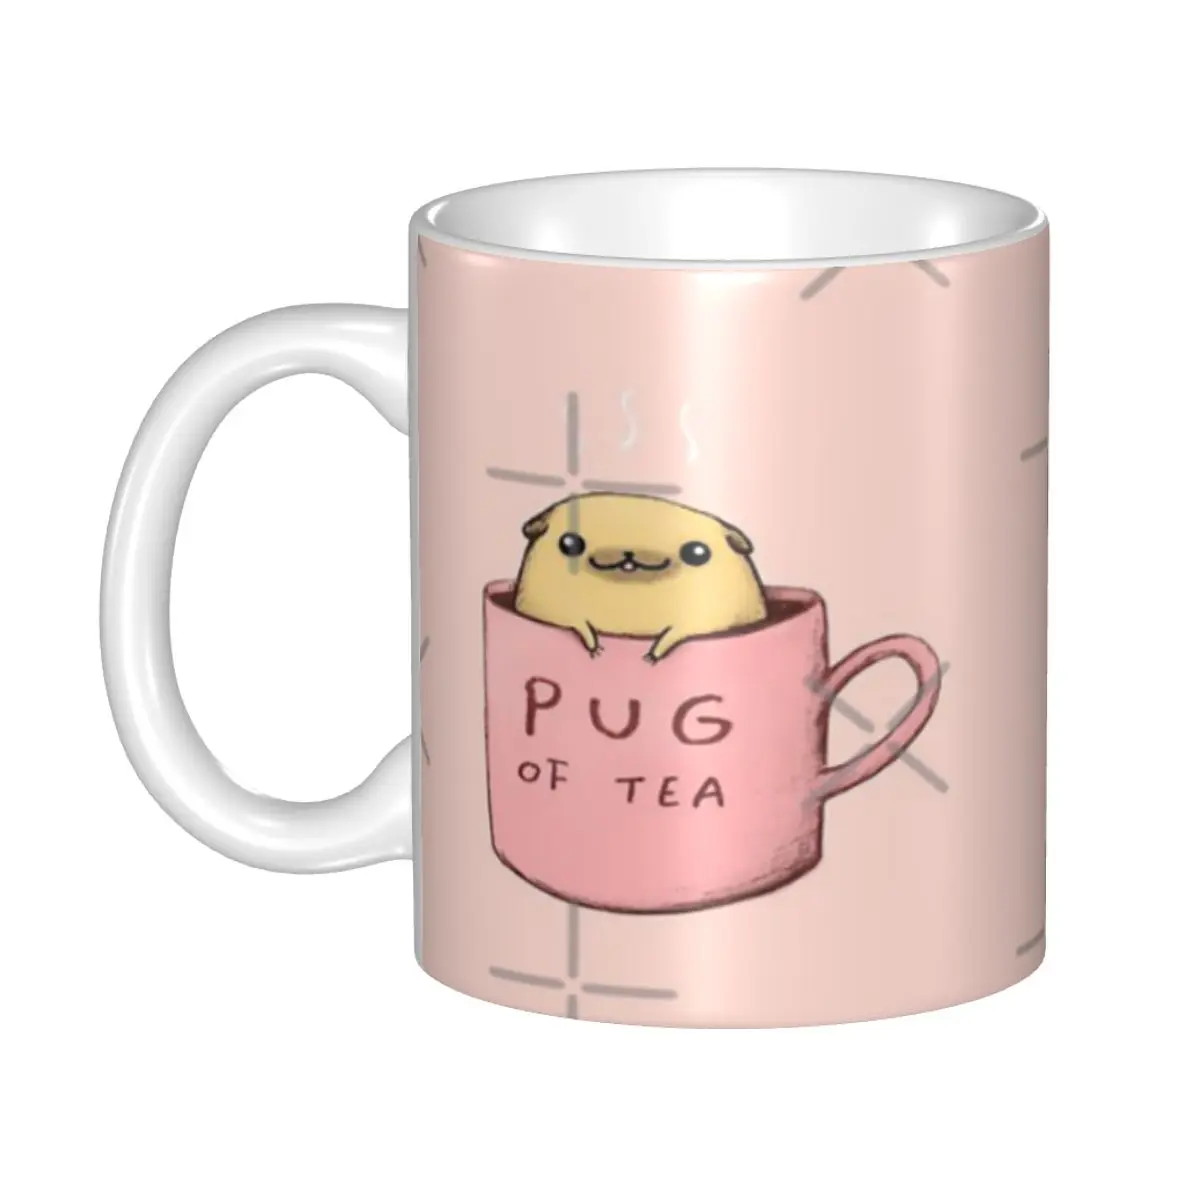 Pug Of Tea Coffee Mugs Adults Playing Smooth cup body Table Essentials